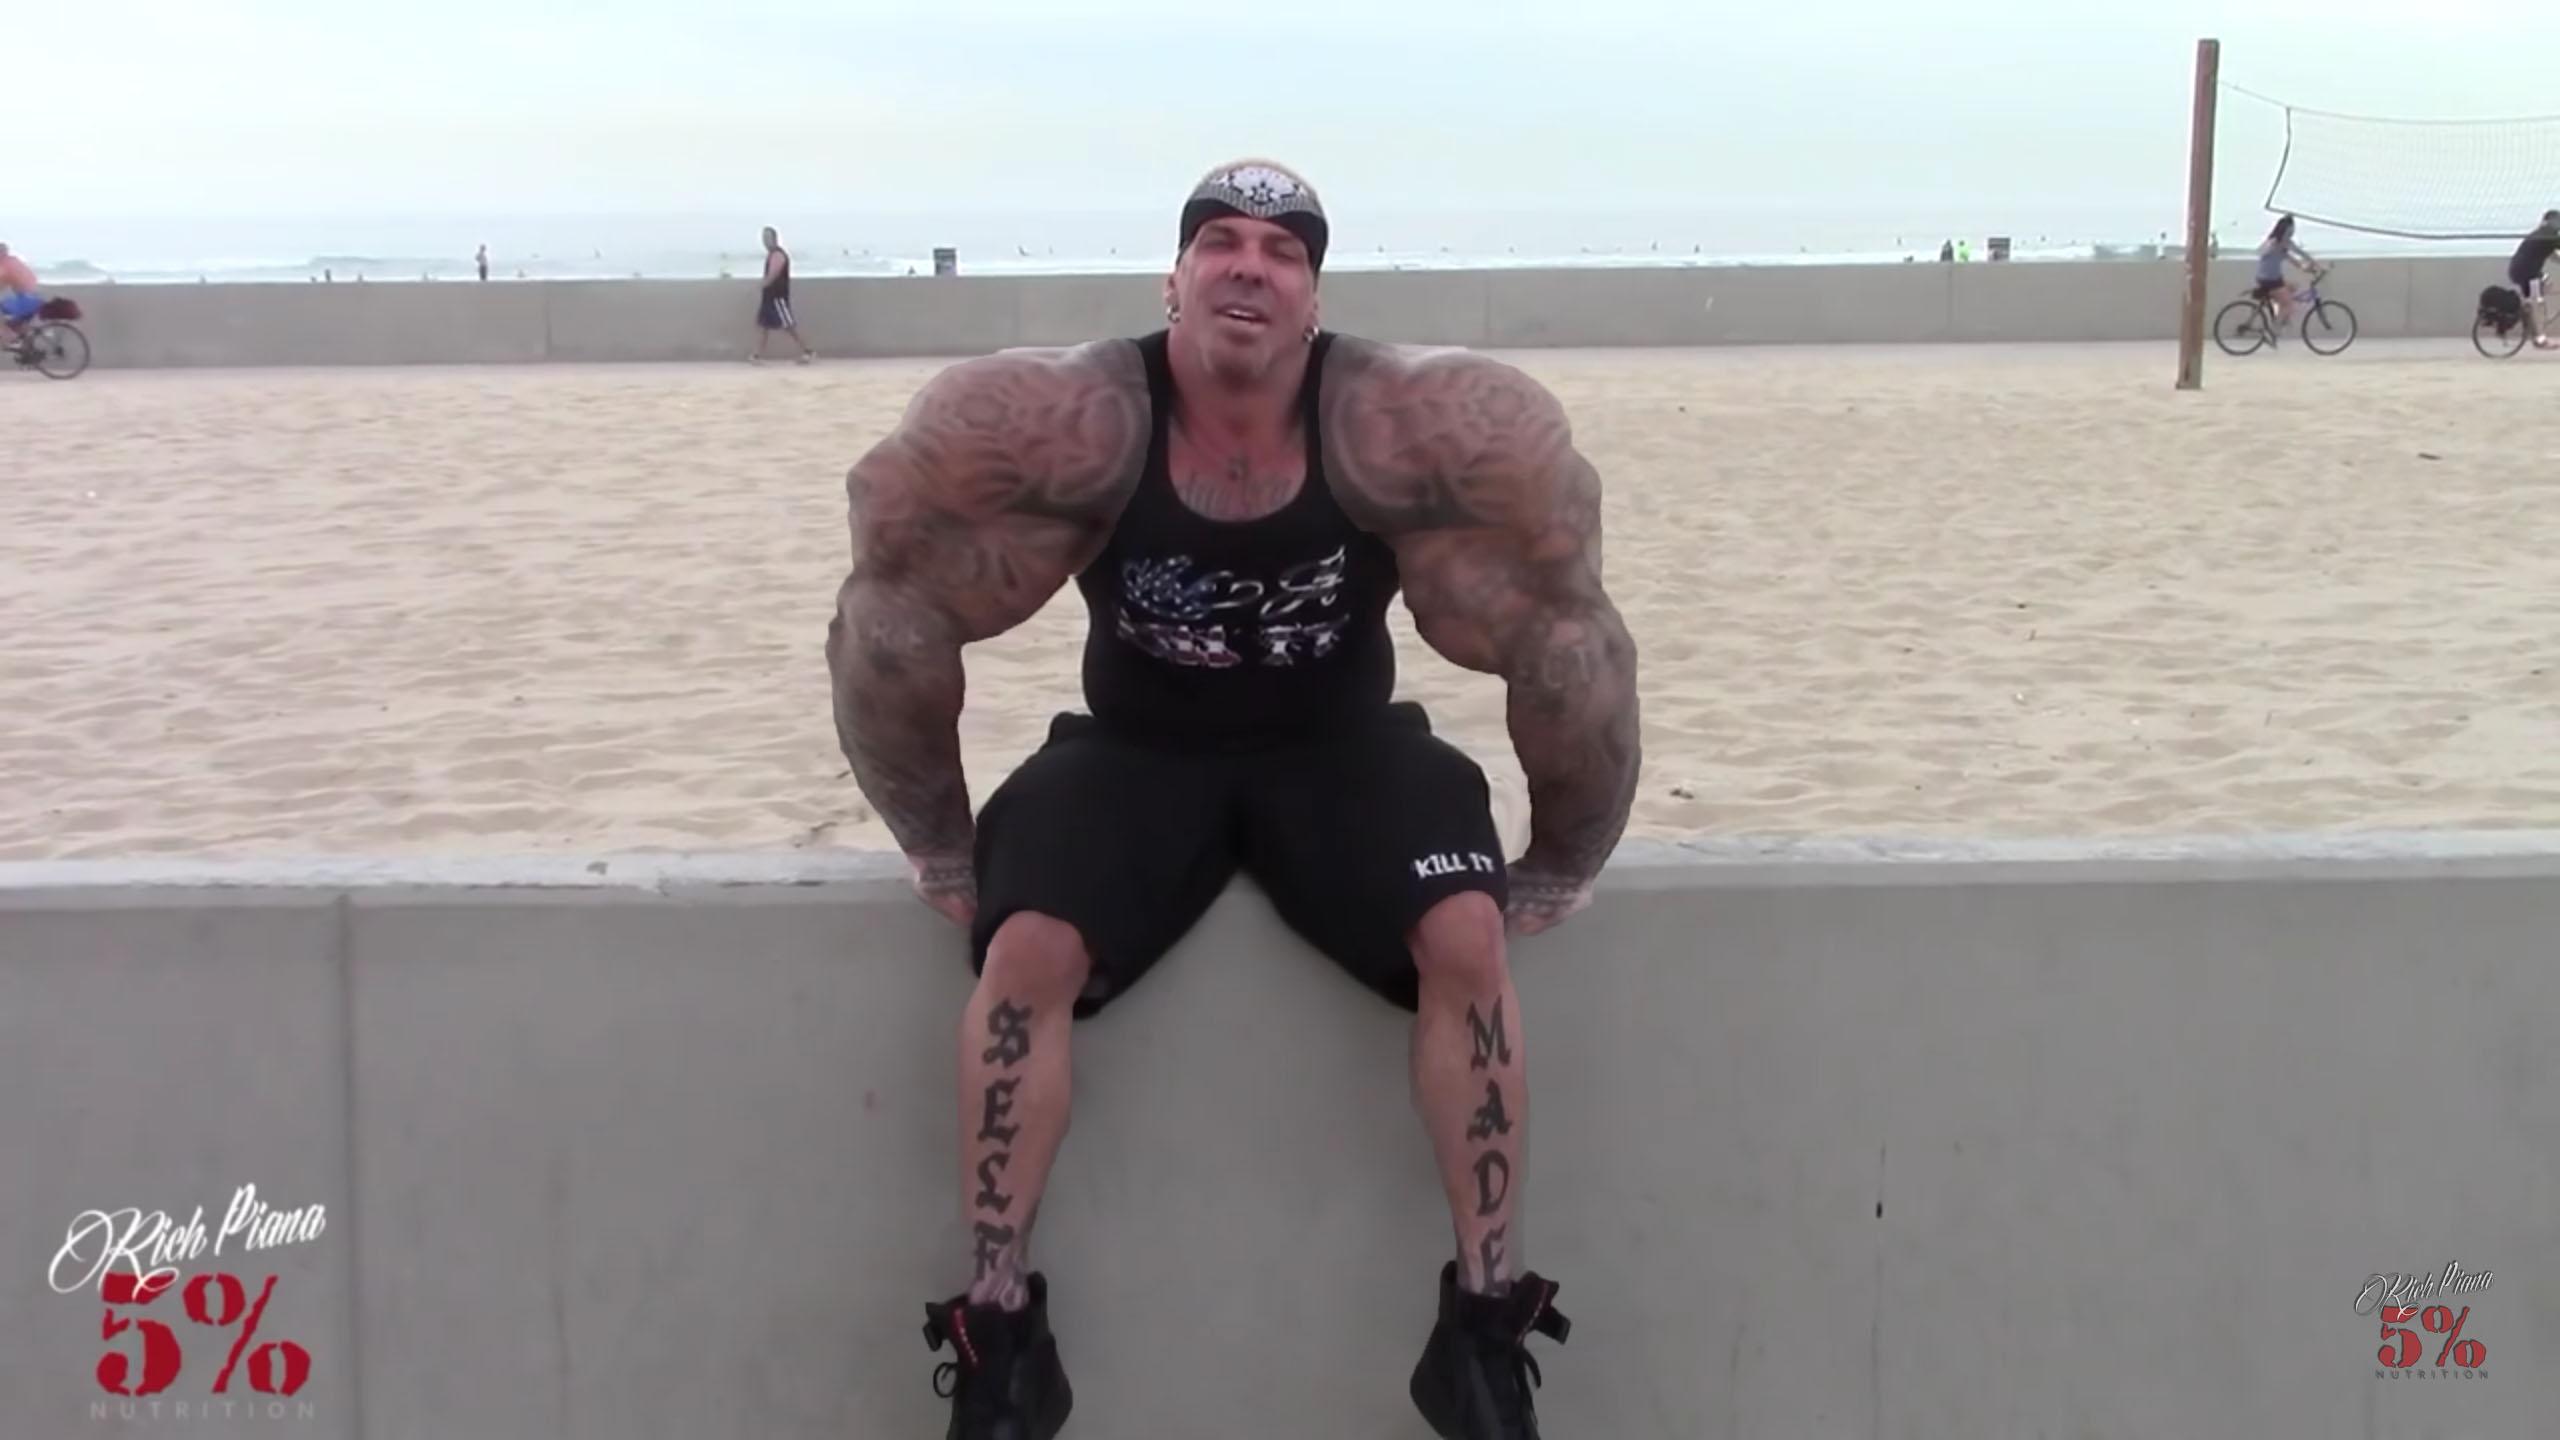 Now Rich PIANA wants to drop down from 311 to 240 in 8 weeks!